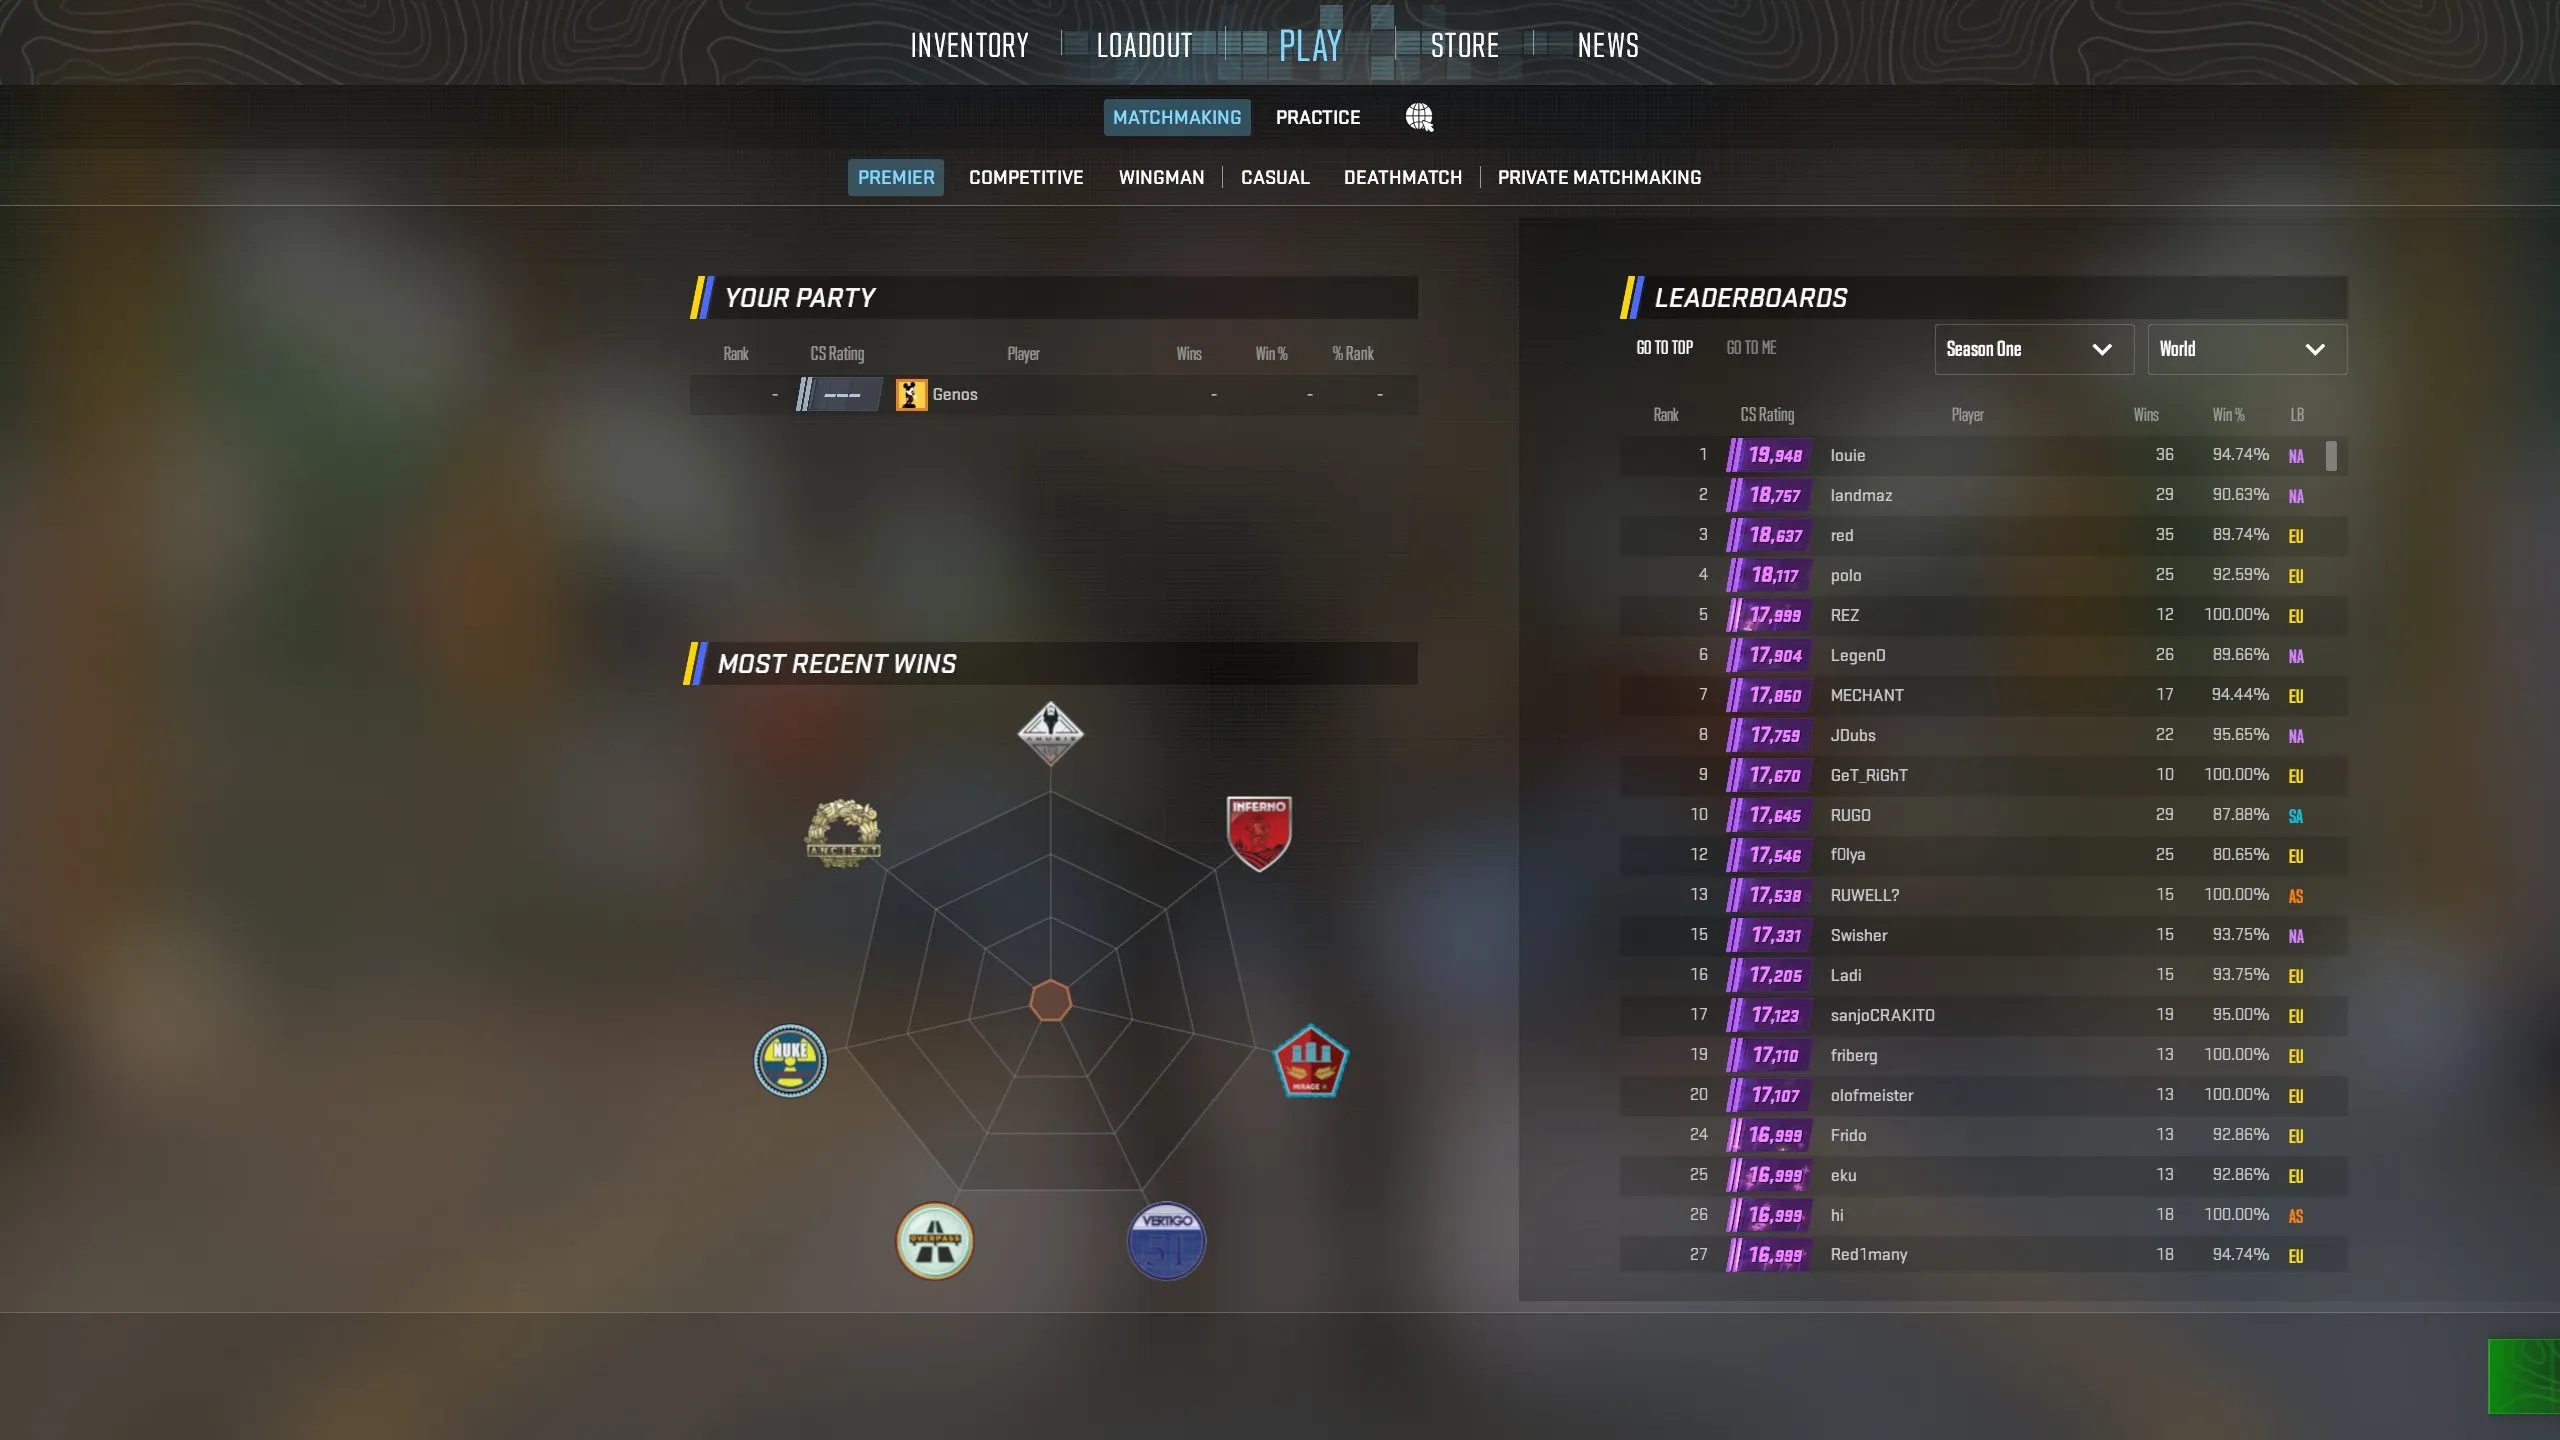 CS2 Ranks vs CSGO: Ranking System Differences for Competitive and